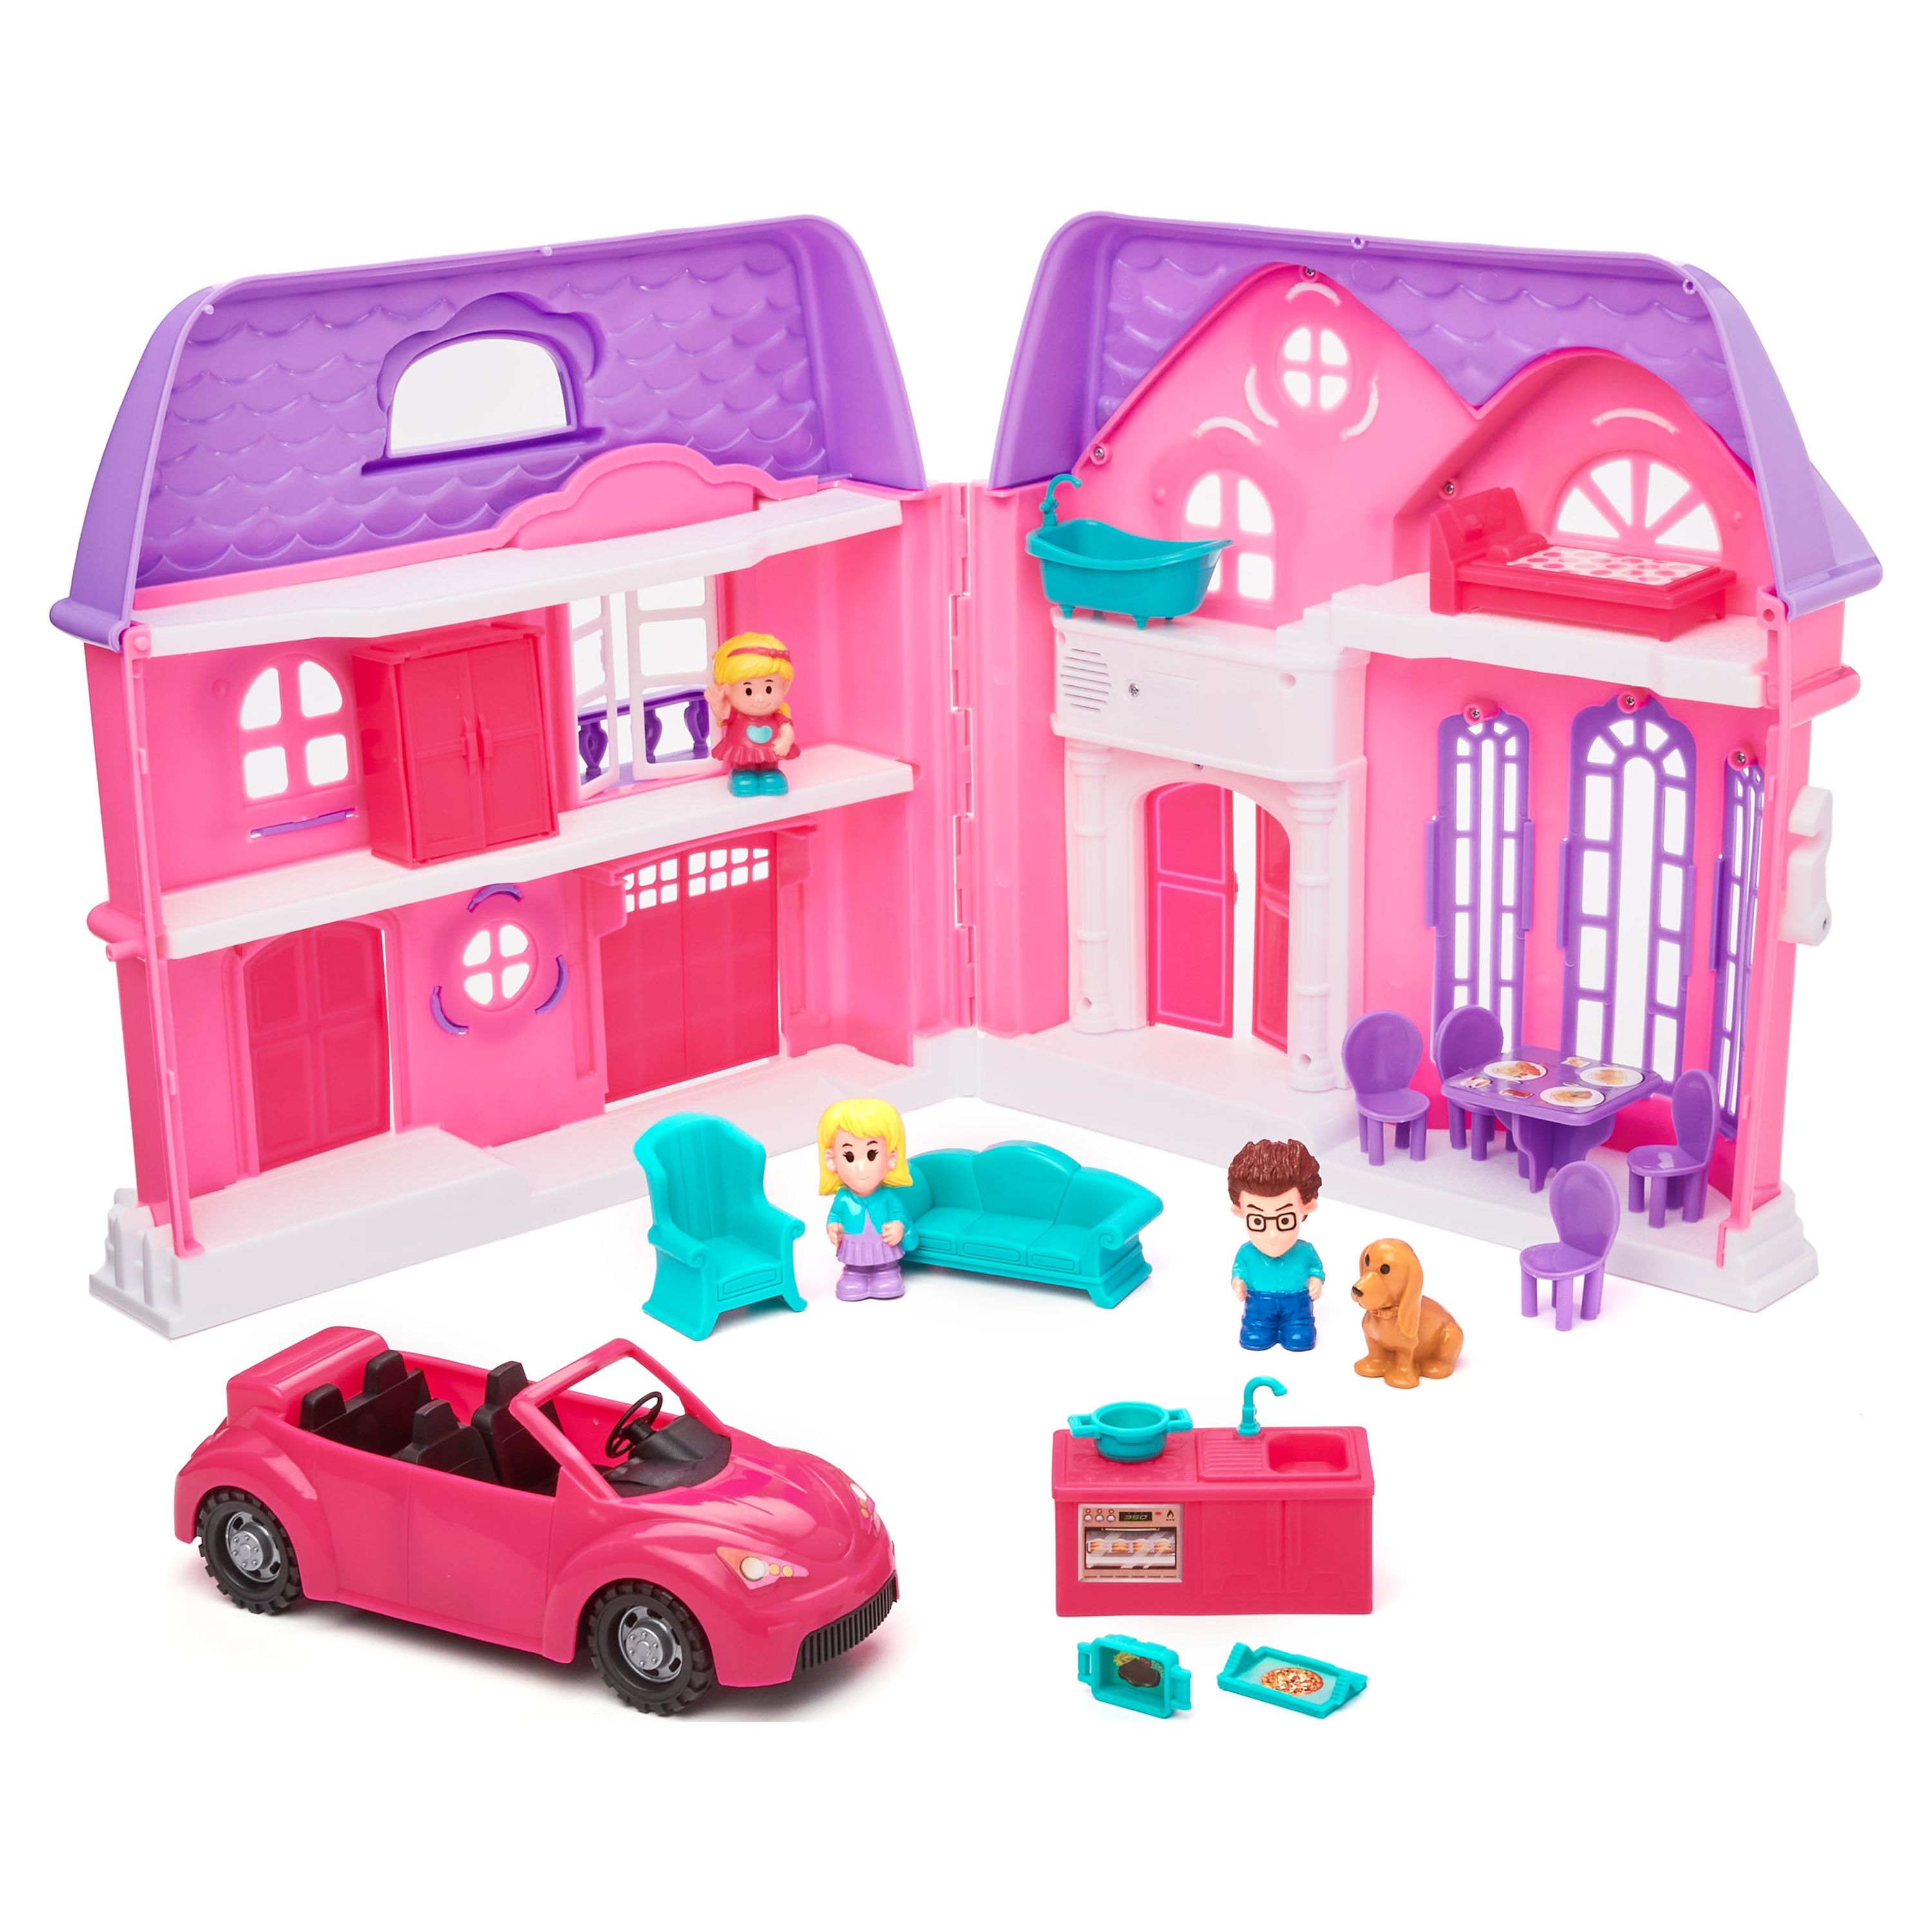 Kid Connection Folding Dollhouse with Family Car, 21 Pieces - image 1 of 5